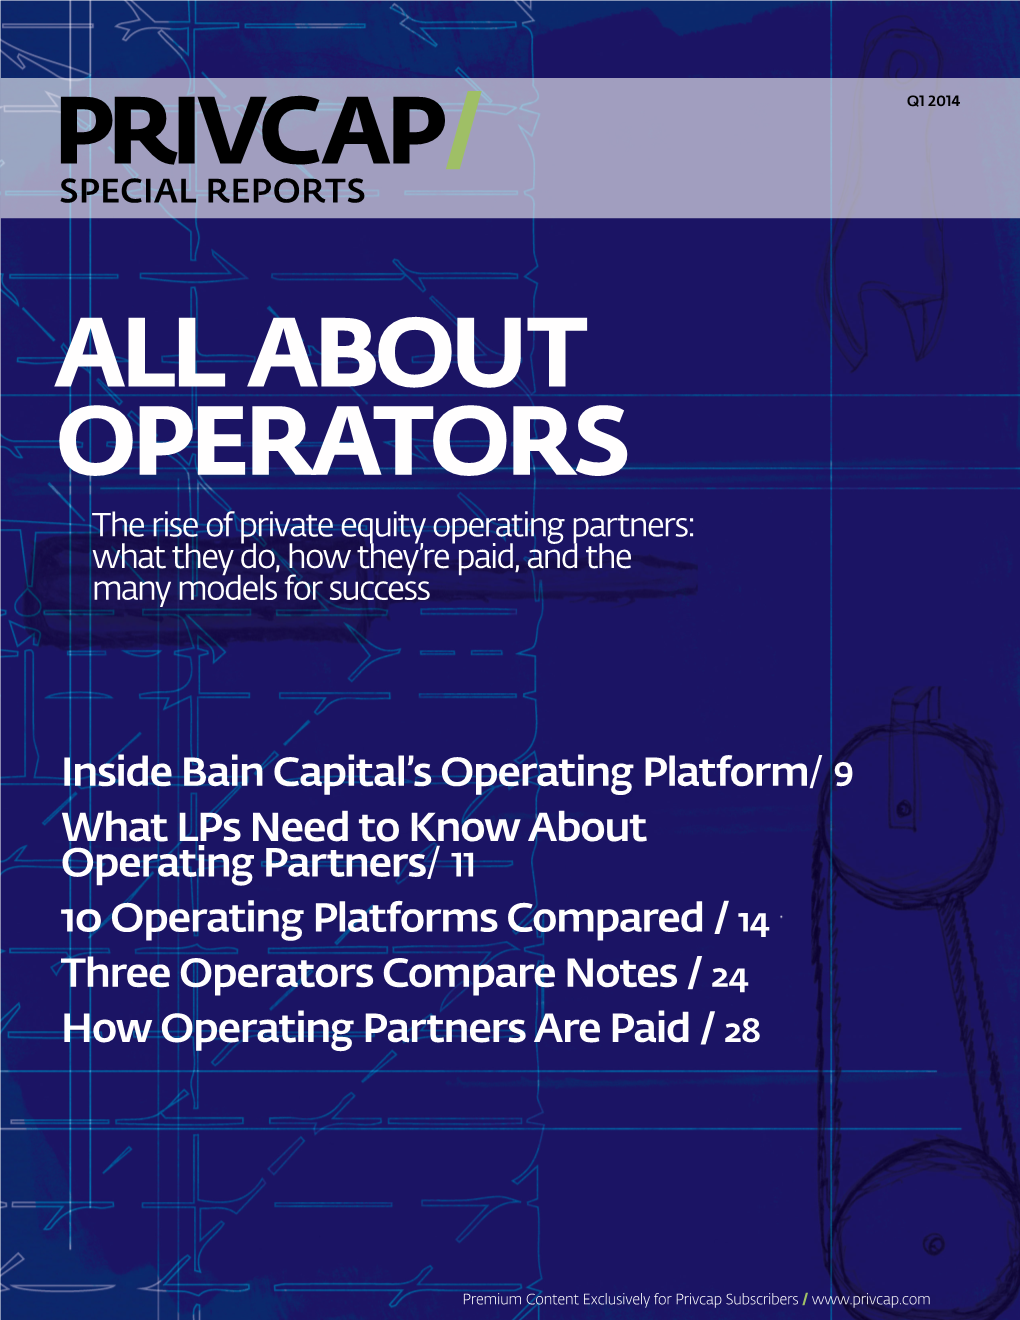 ABOUT OPERATORS the Rise of Private Equity Operating Partners: What They Do, How They’Re Paid, and the Many Models for Success